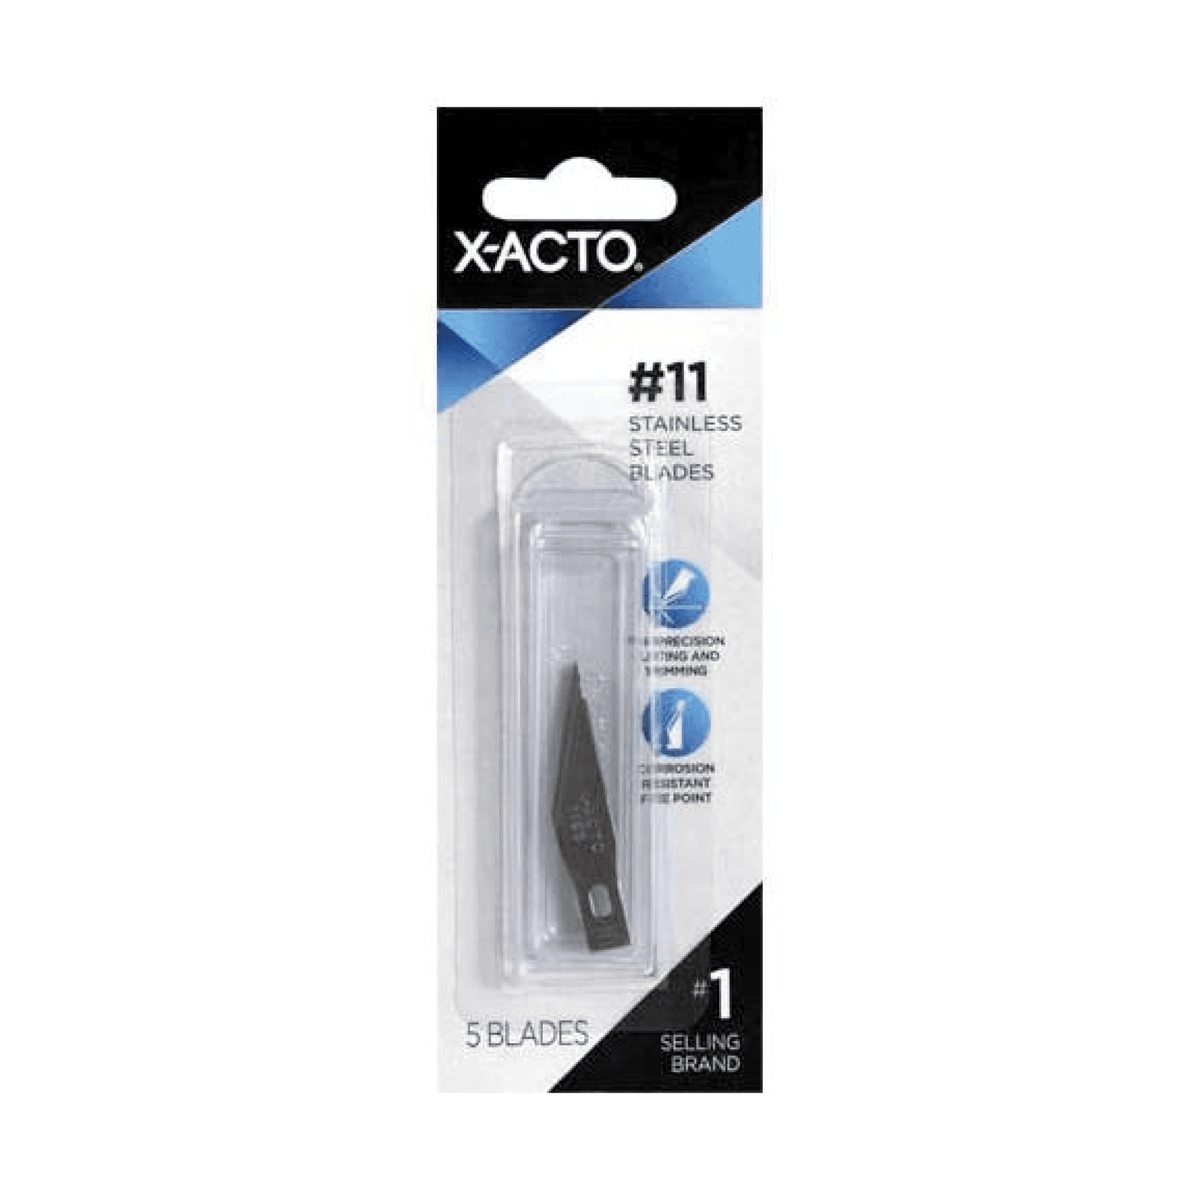 X-Acto #11 Stainless Steel Blade 5 Pack | Spray Planet